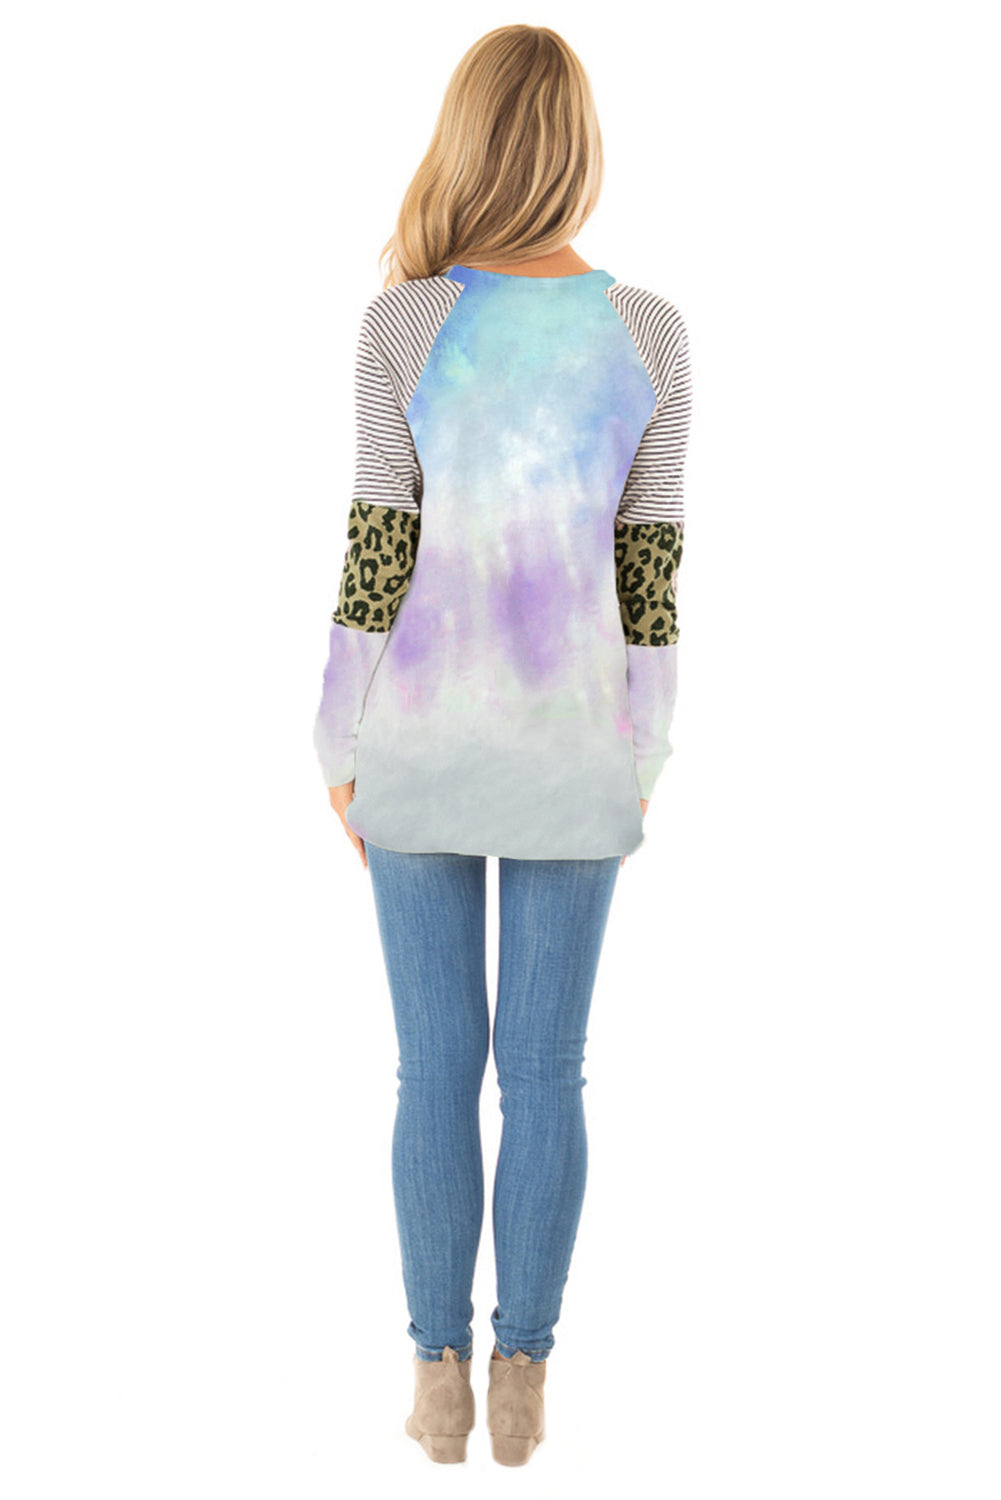 Tie-dyed Striped and Leopard Long Sleeves Top